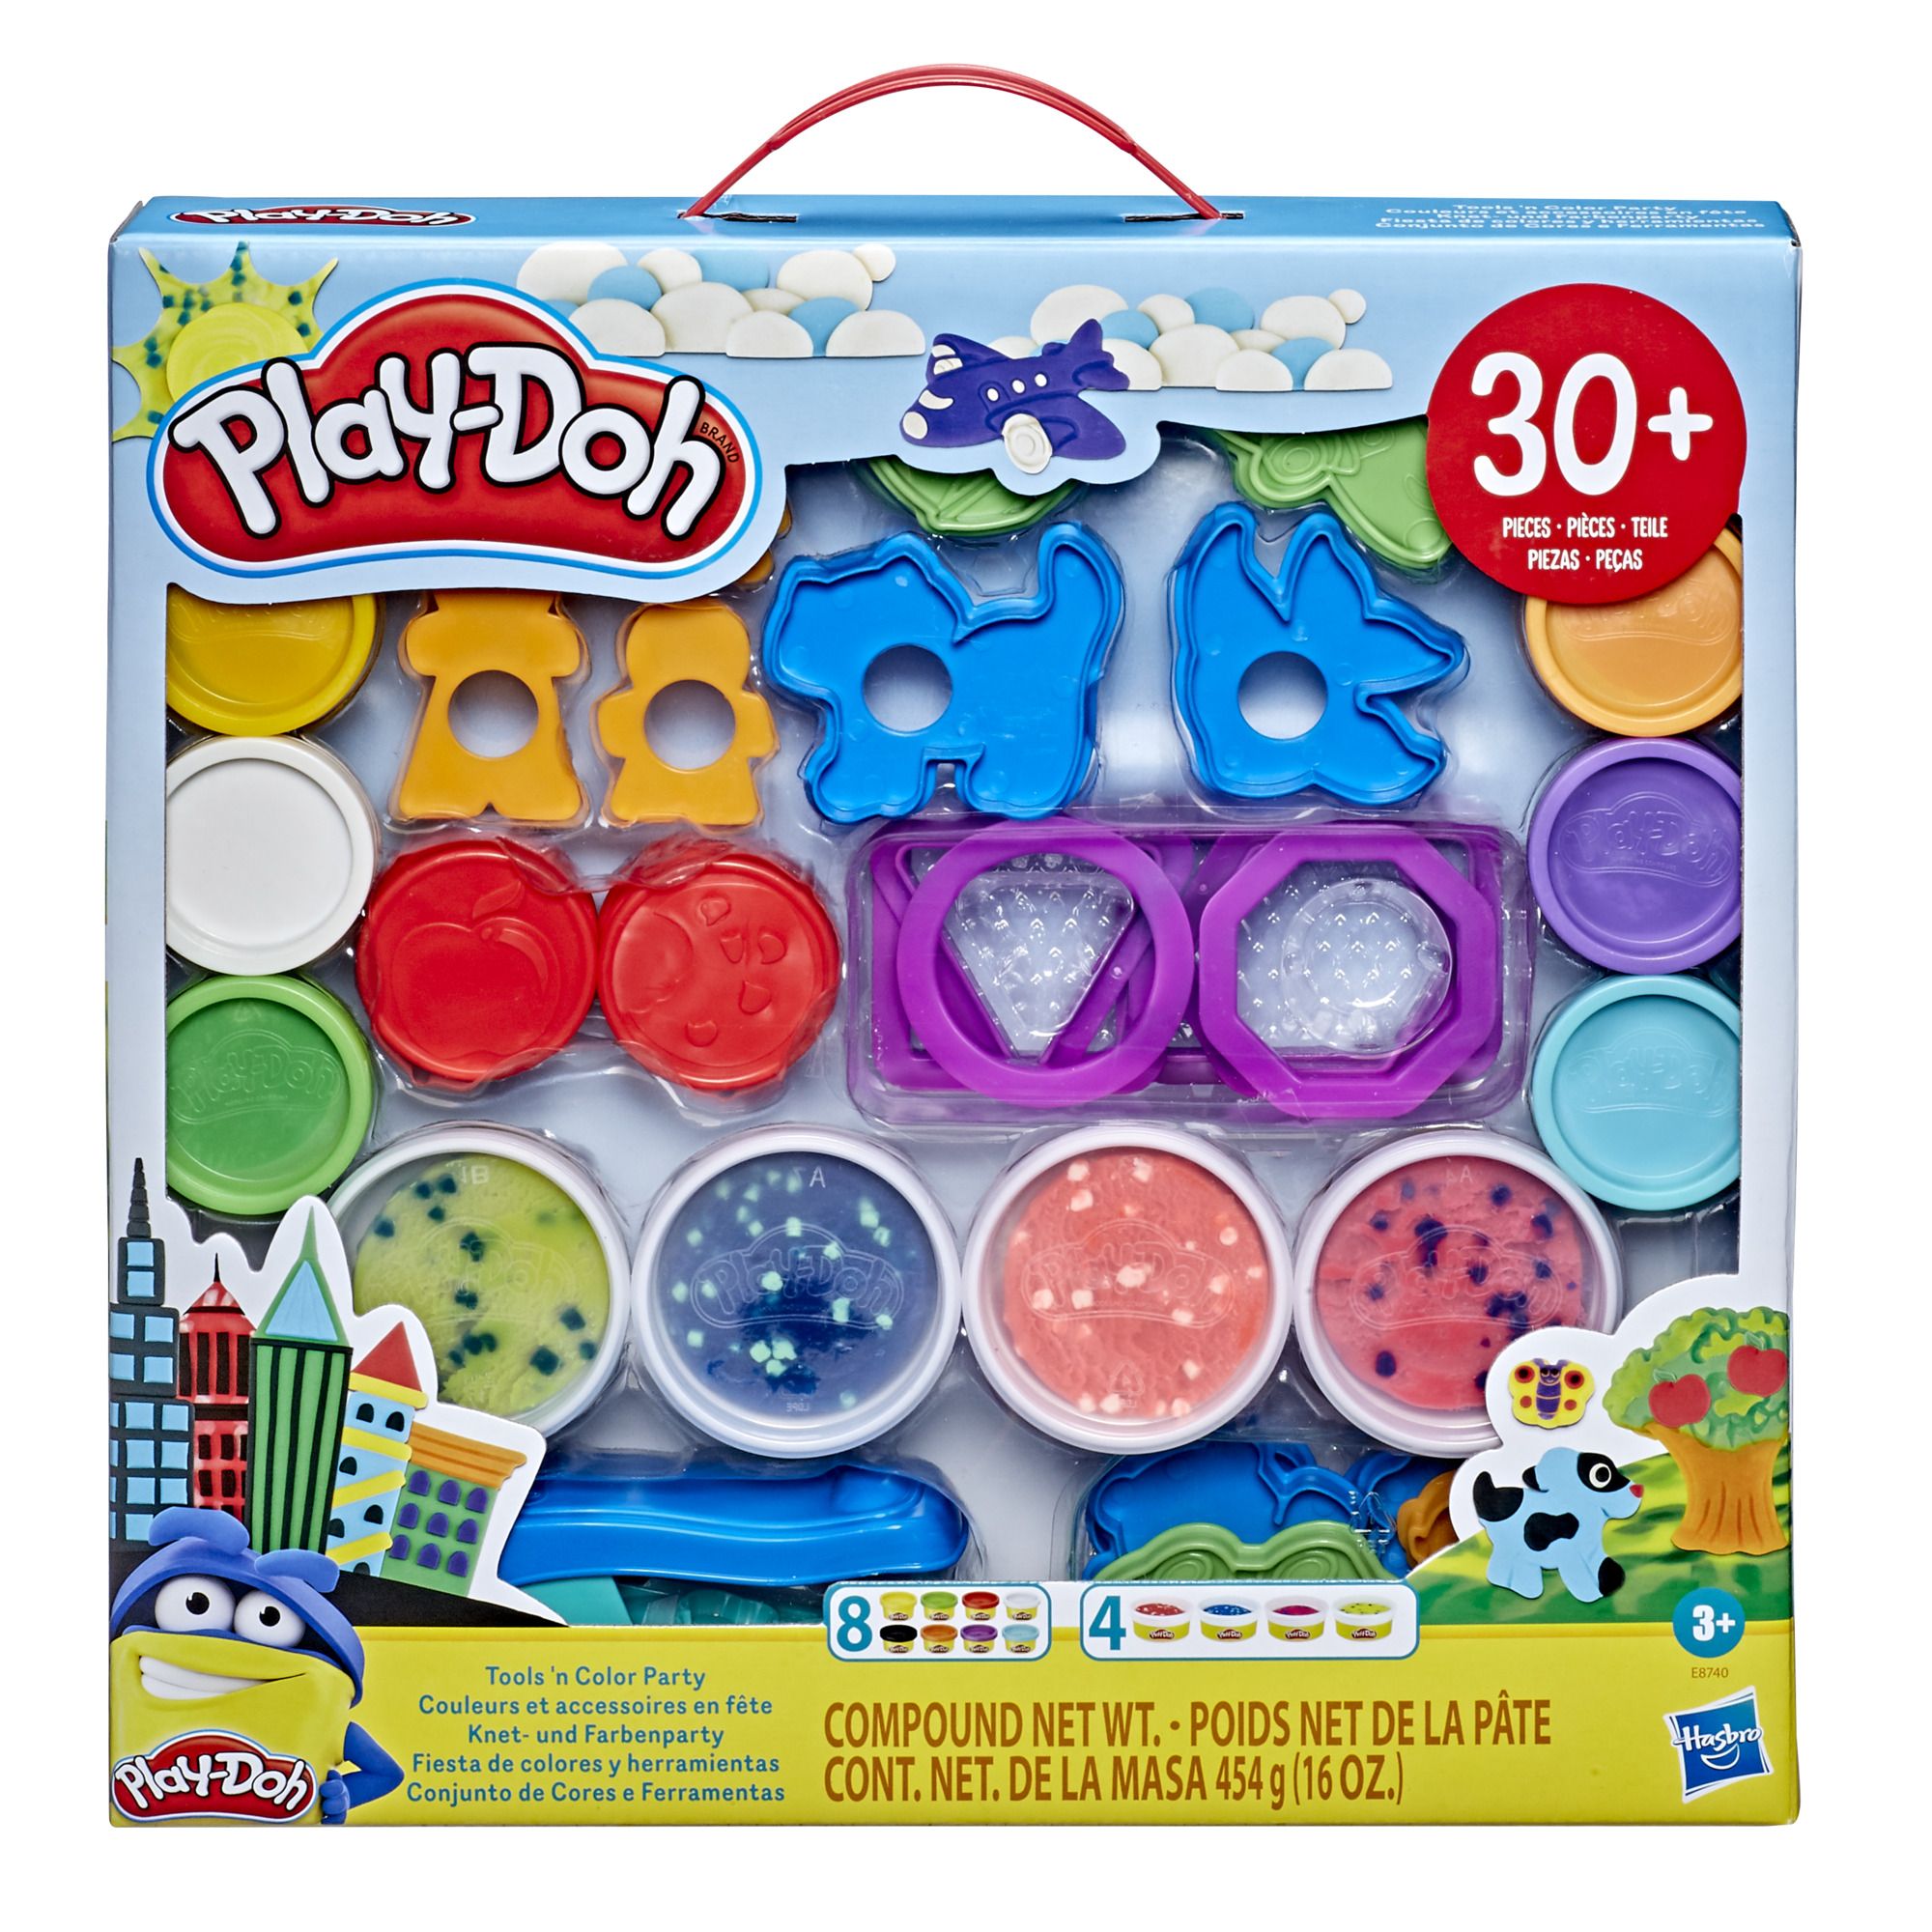 Play-Doh 4-Pack of Colors, 3-Packs (12 Cans Total) 